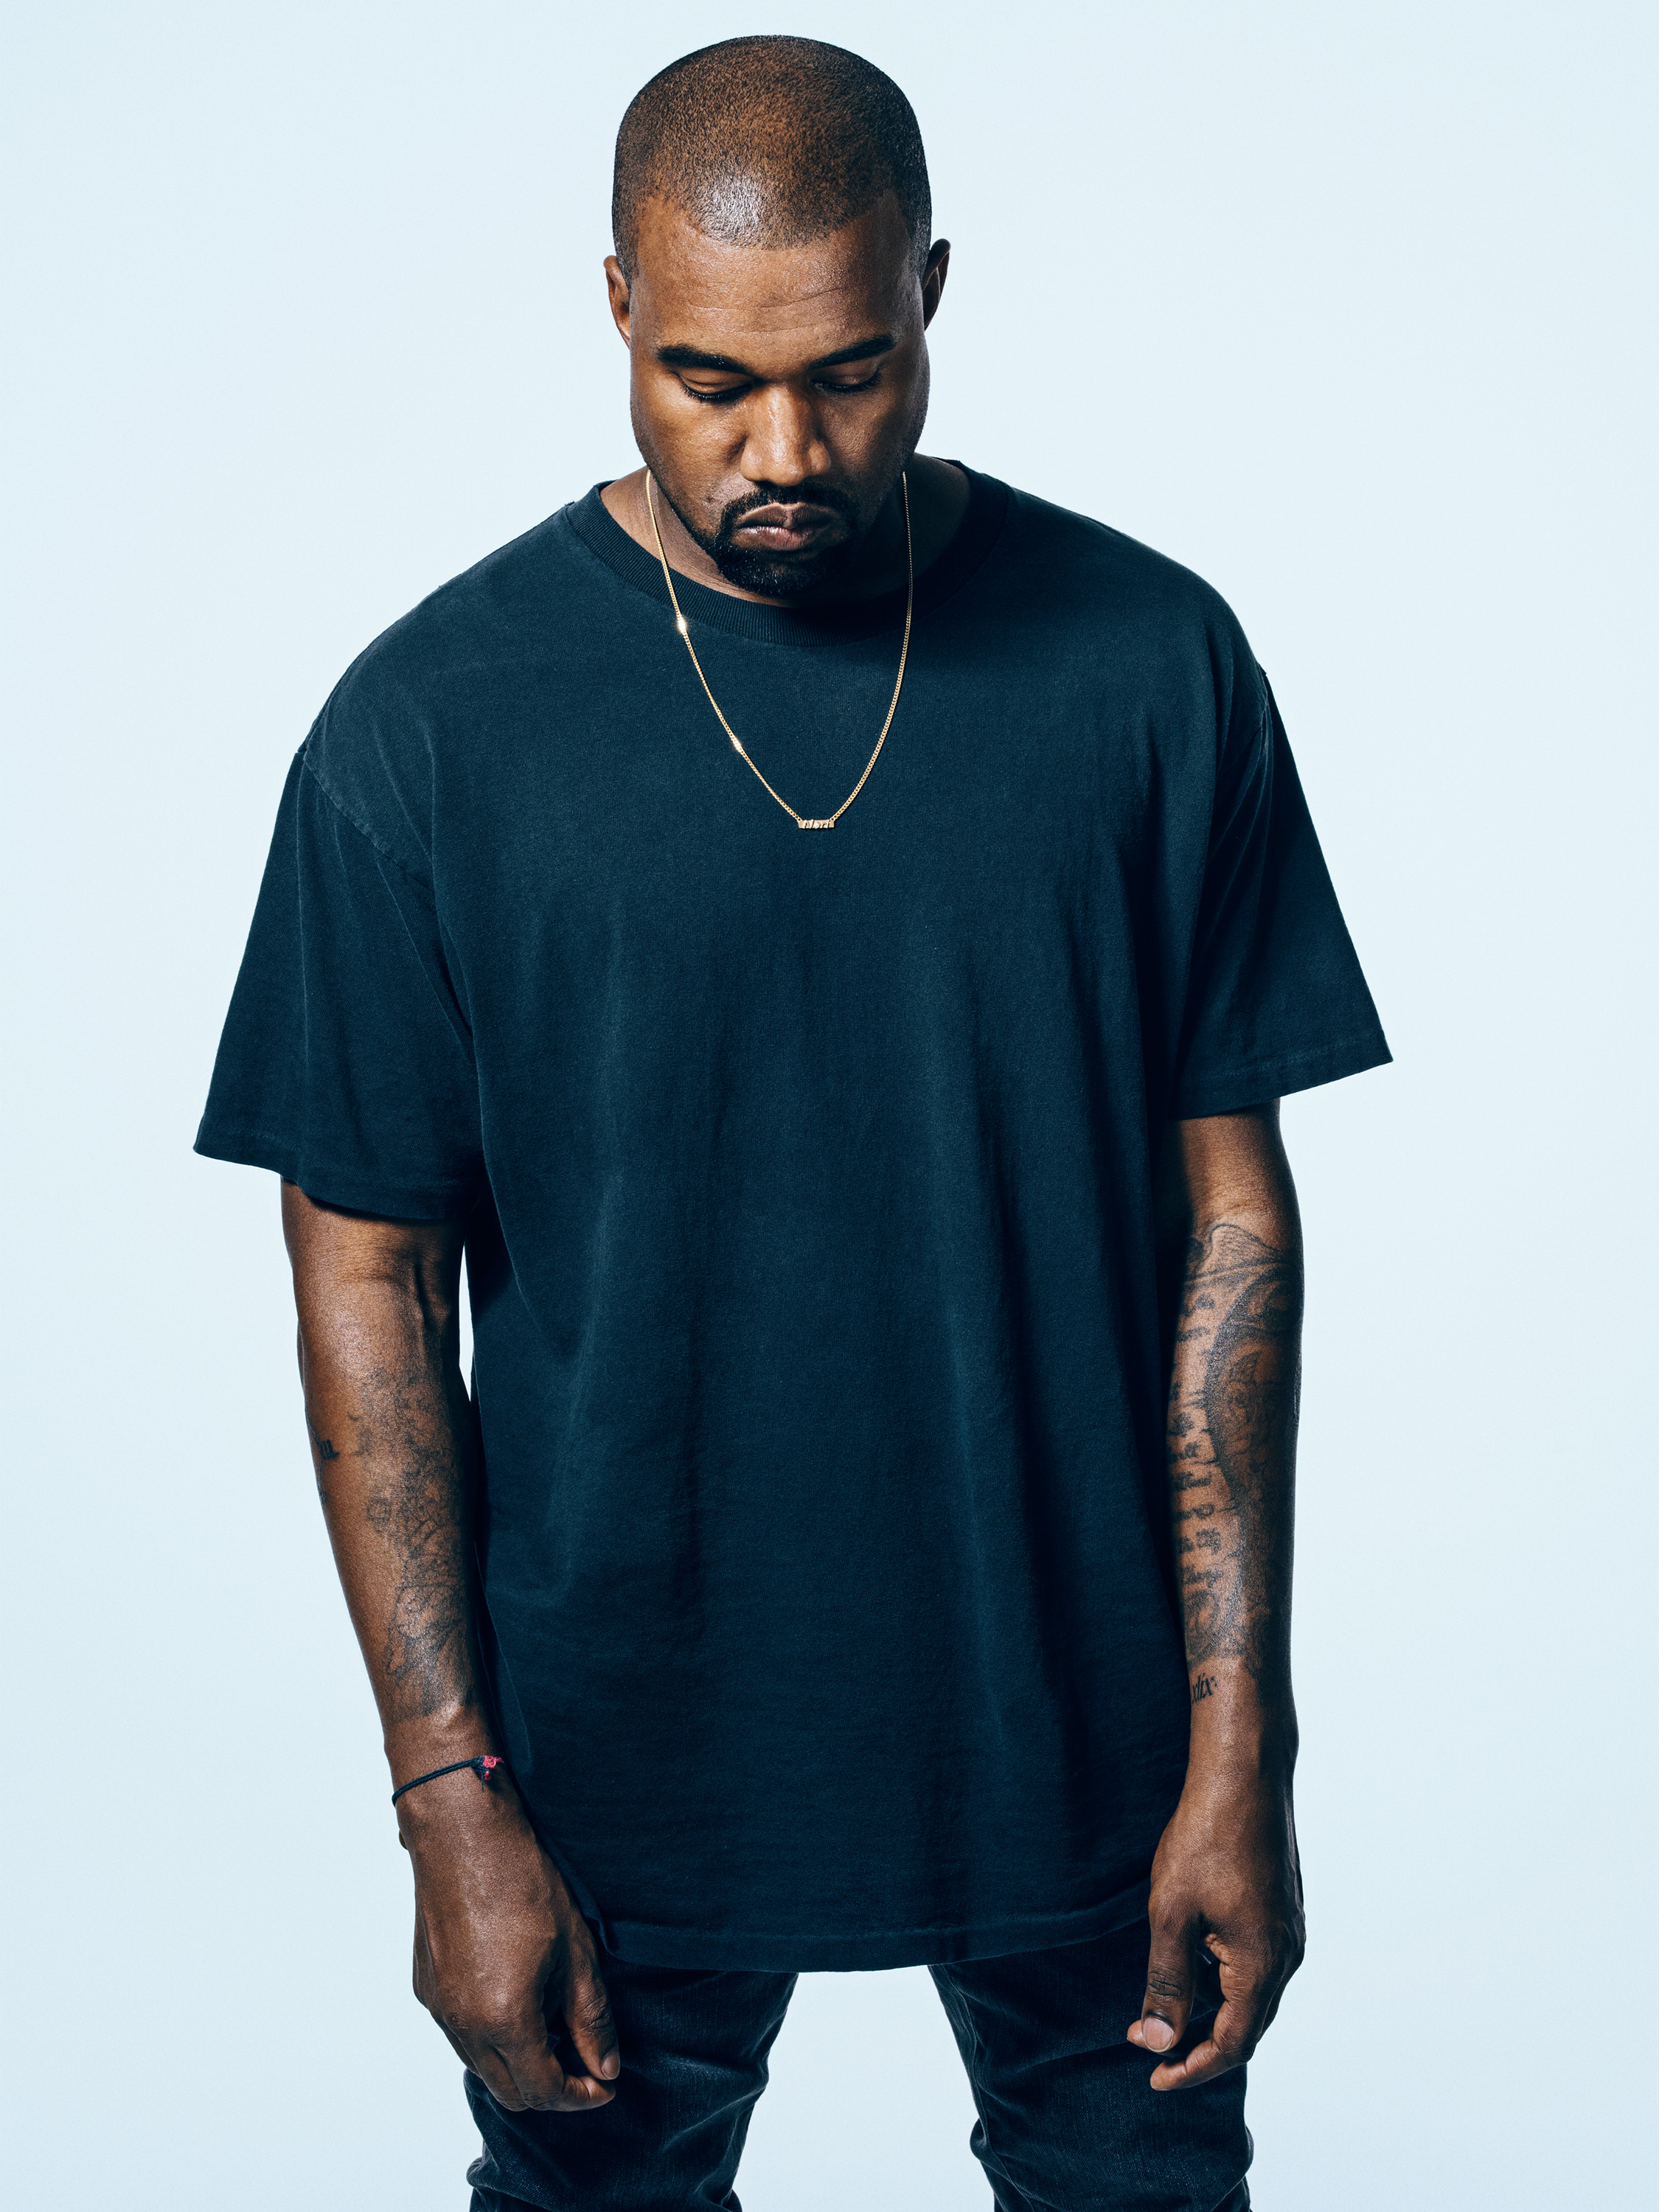 Portrait of musician Kanye West photographed at Milk Studios in Los Angeles, California for time on march 18th, 2015.